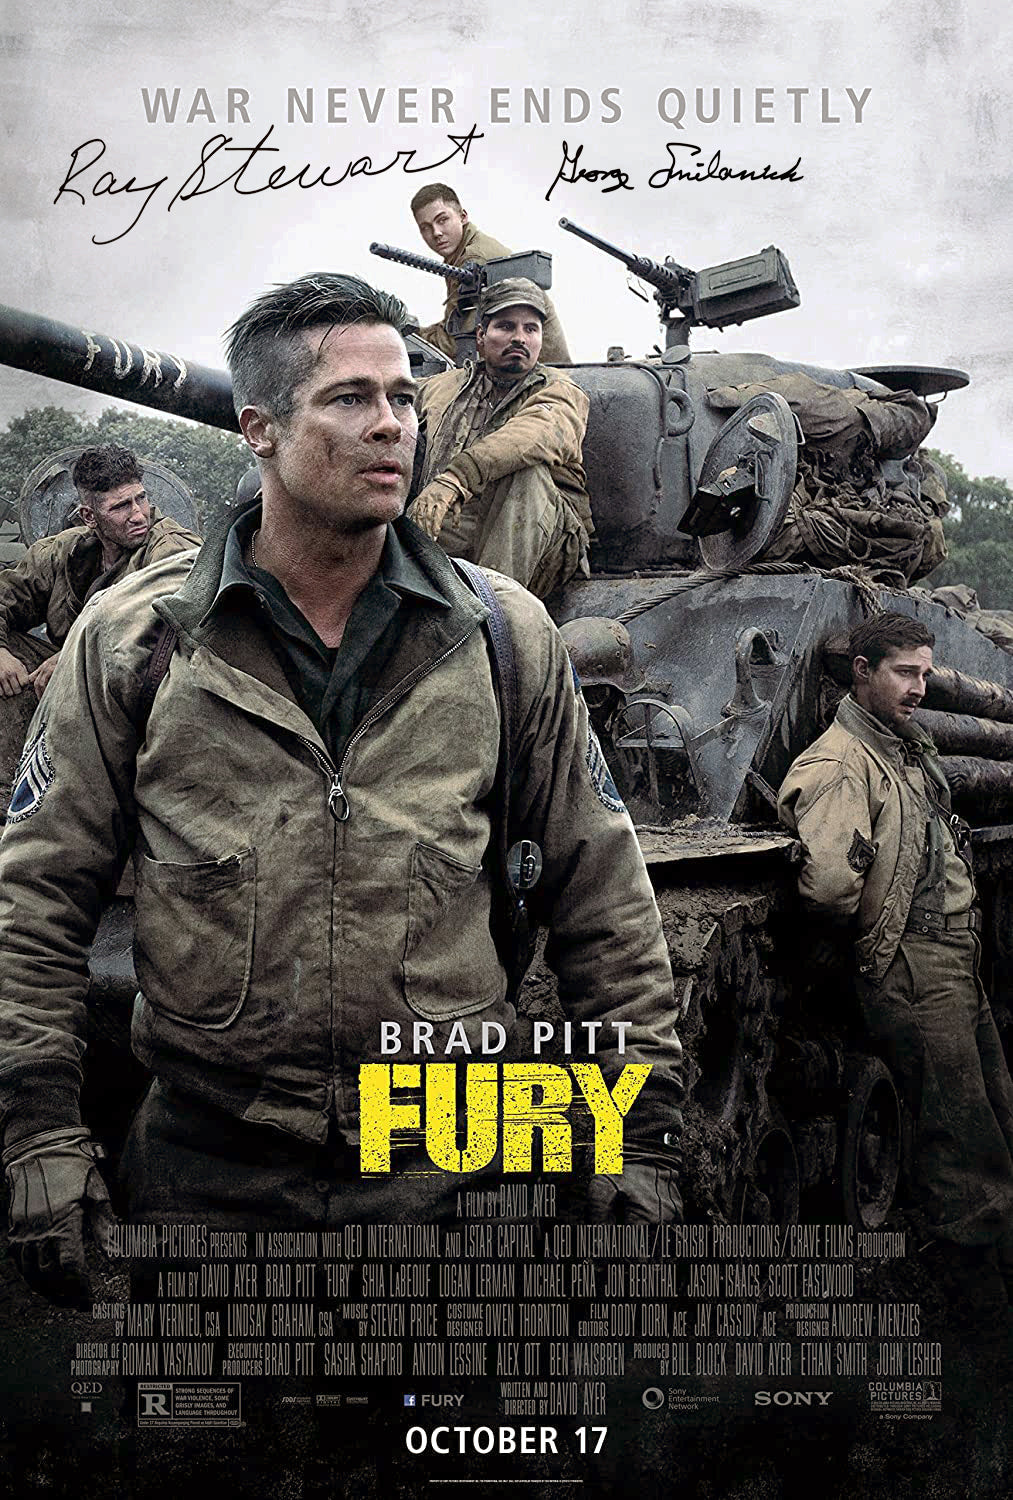 Autographed "FURY" Poster